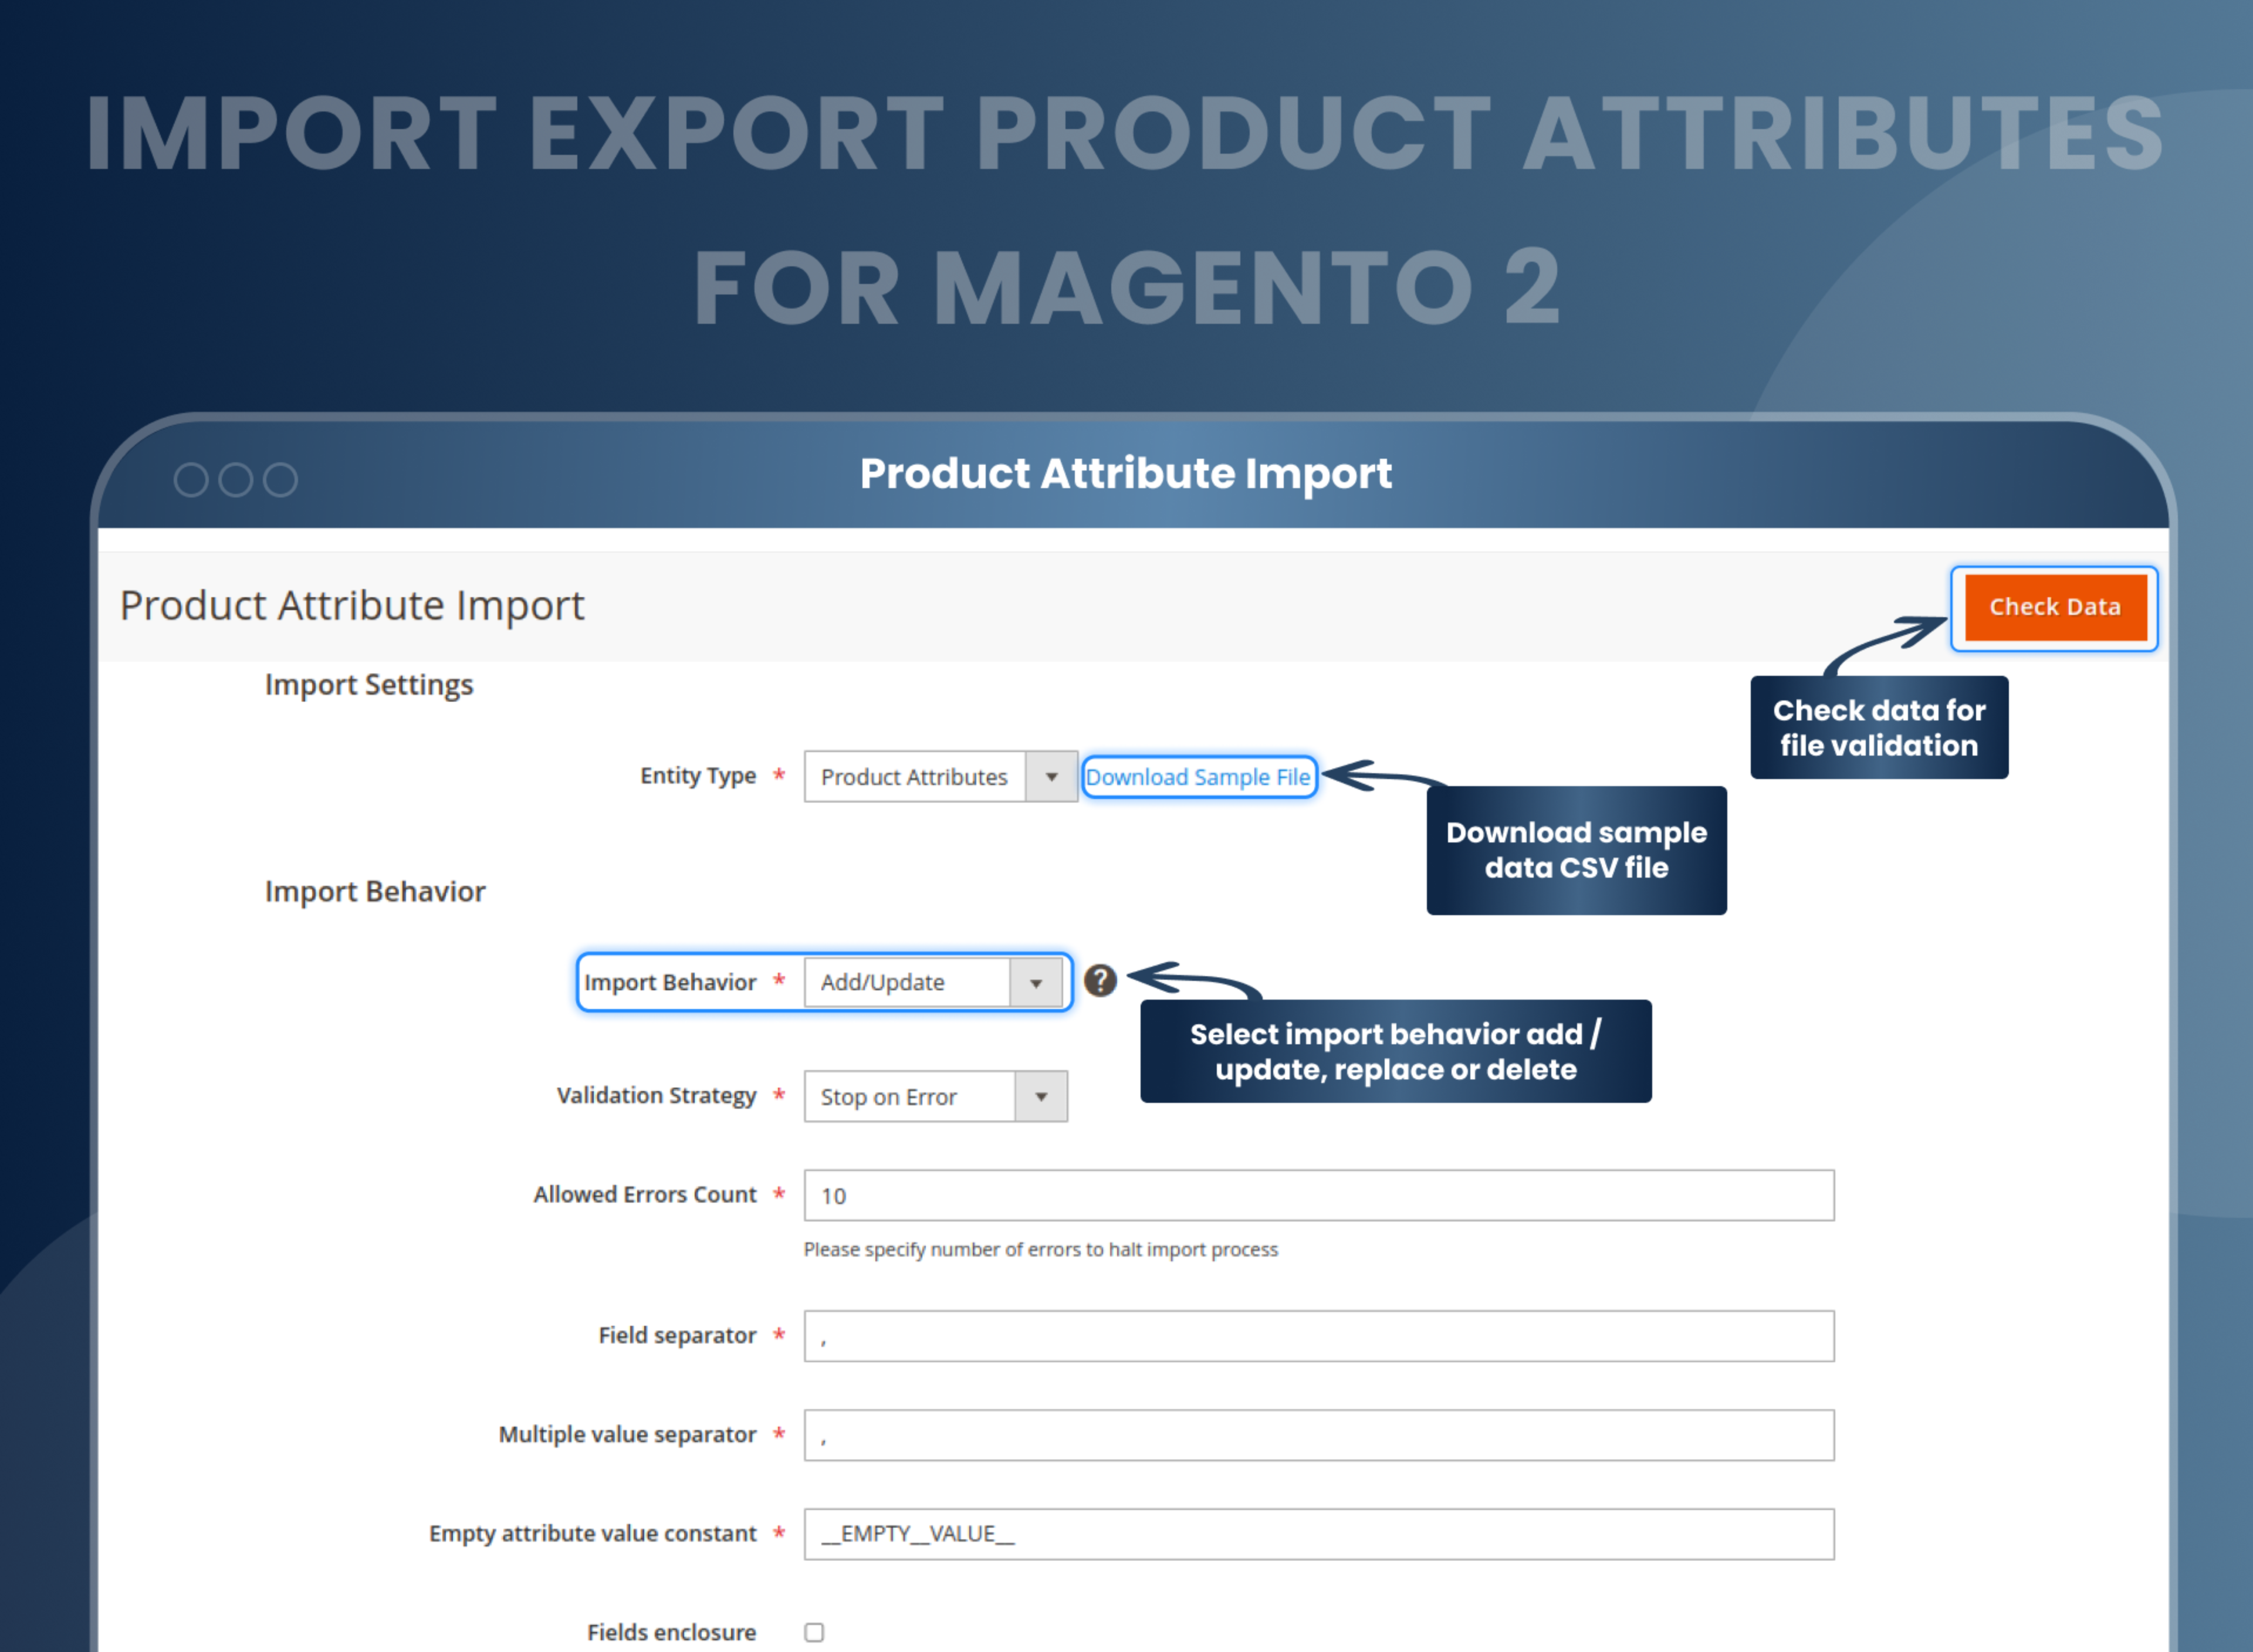 Product Attribute Import